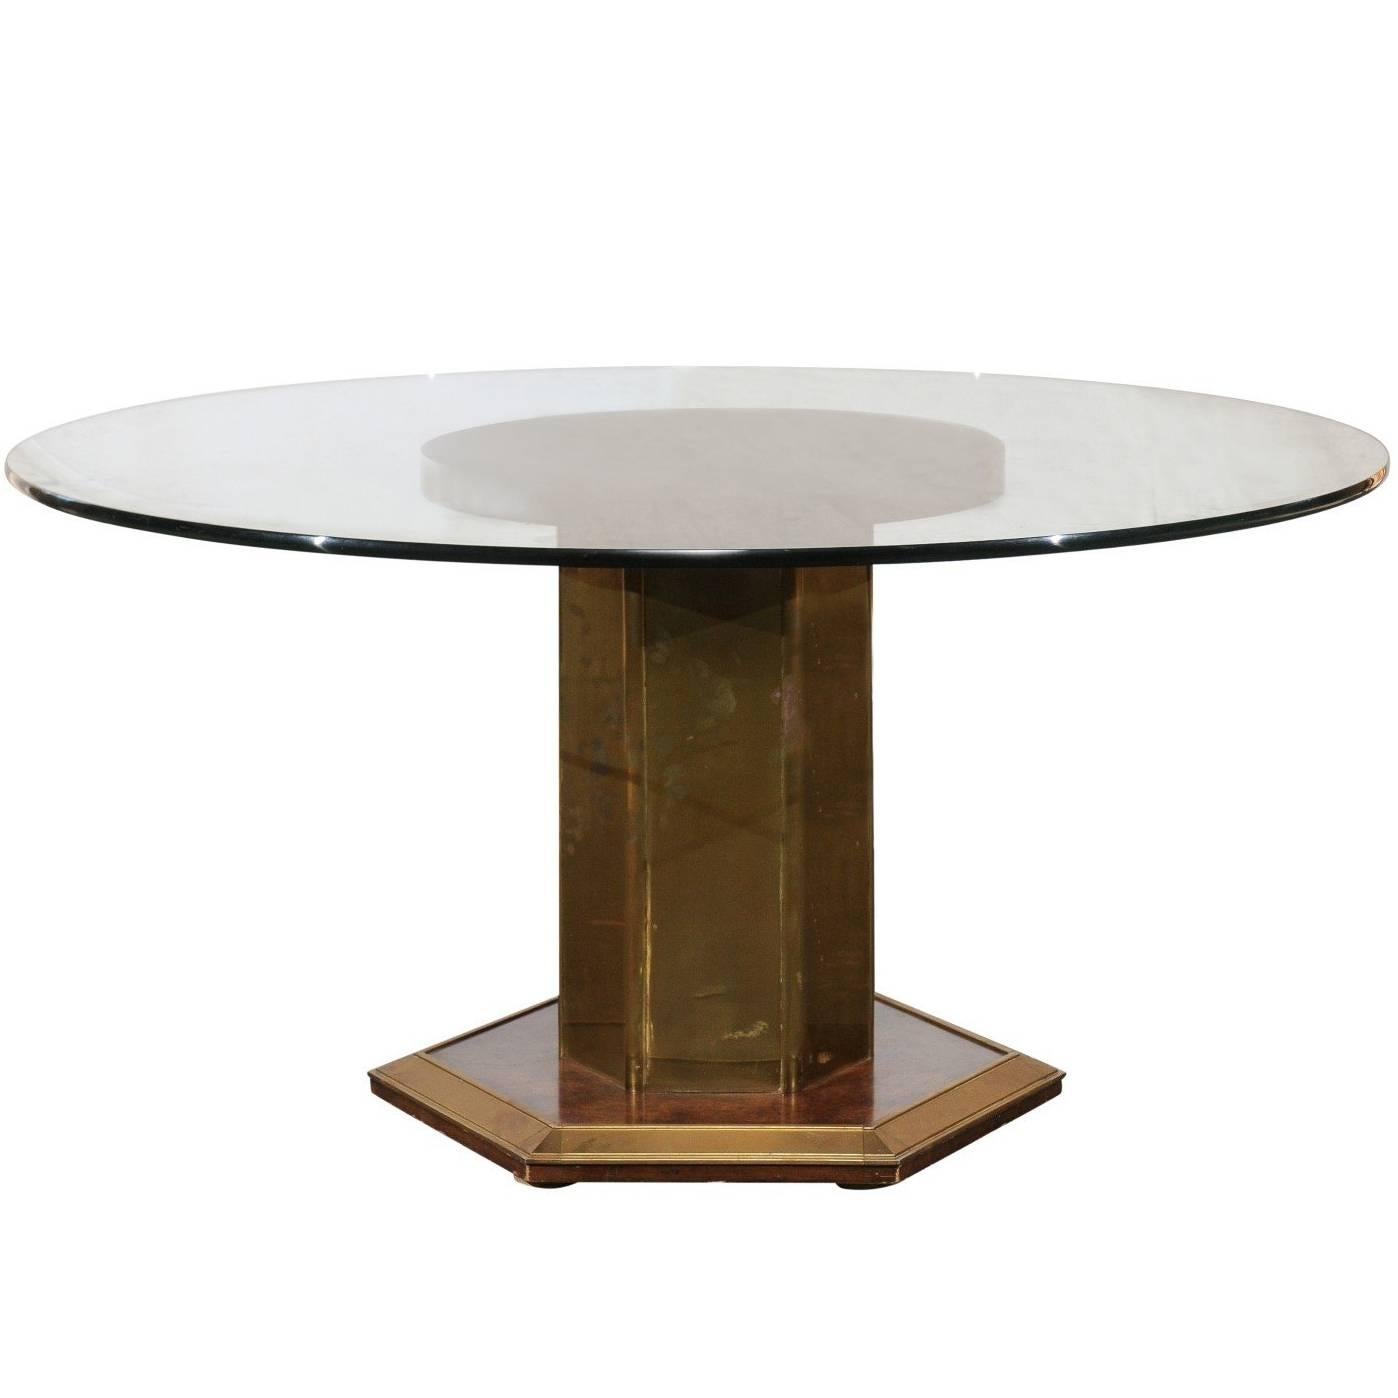 Mid-20th Century American Brass & Burled Wood Pedestal Round Glass Dining Table